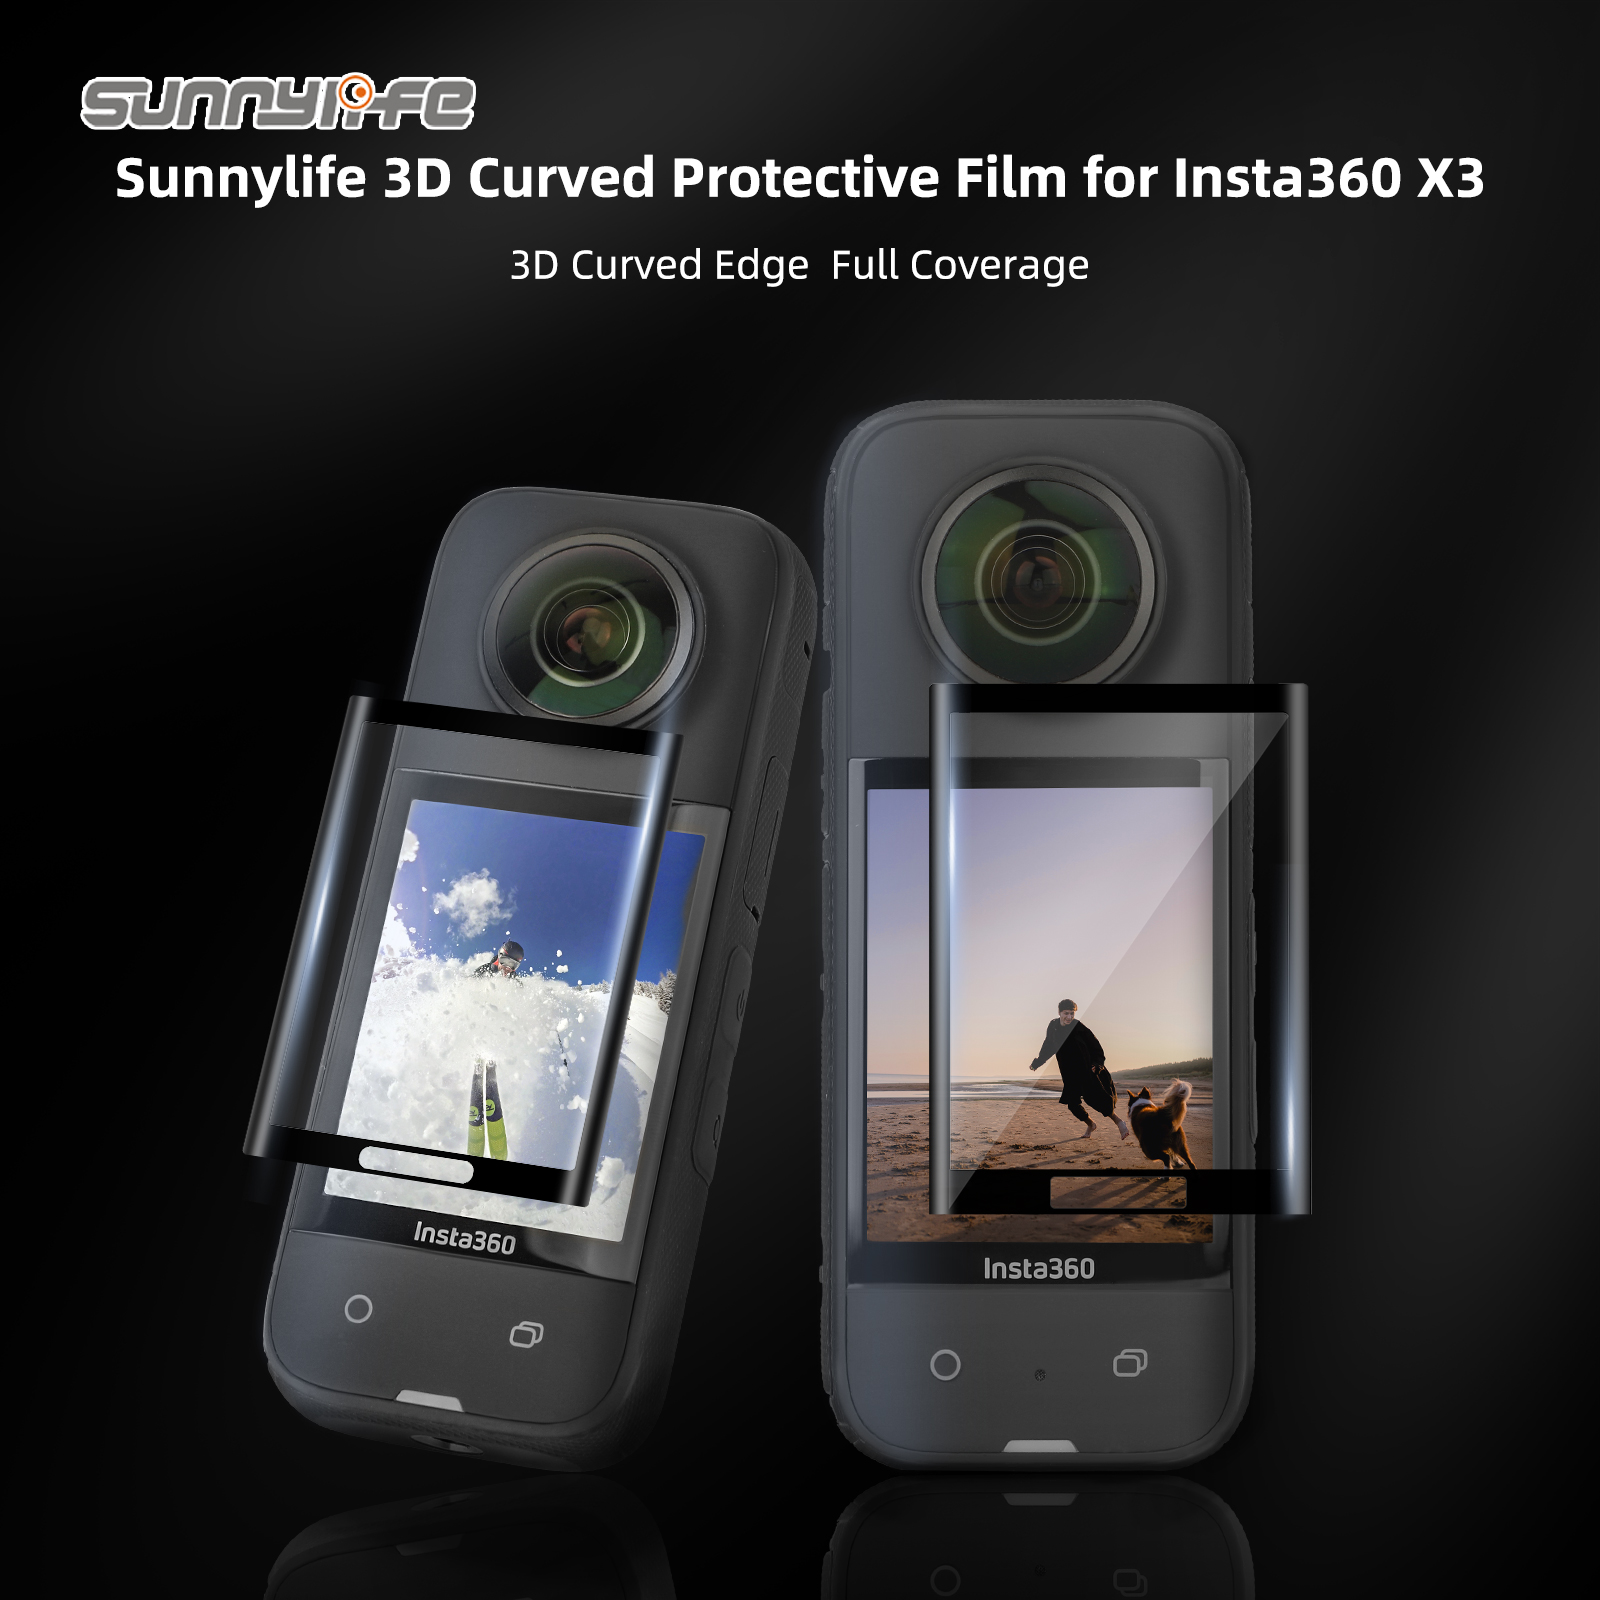 Insta360 X3 Screen Protector For Panoramic Camera Protection For